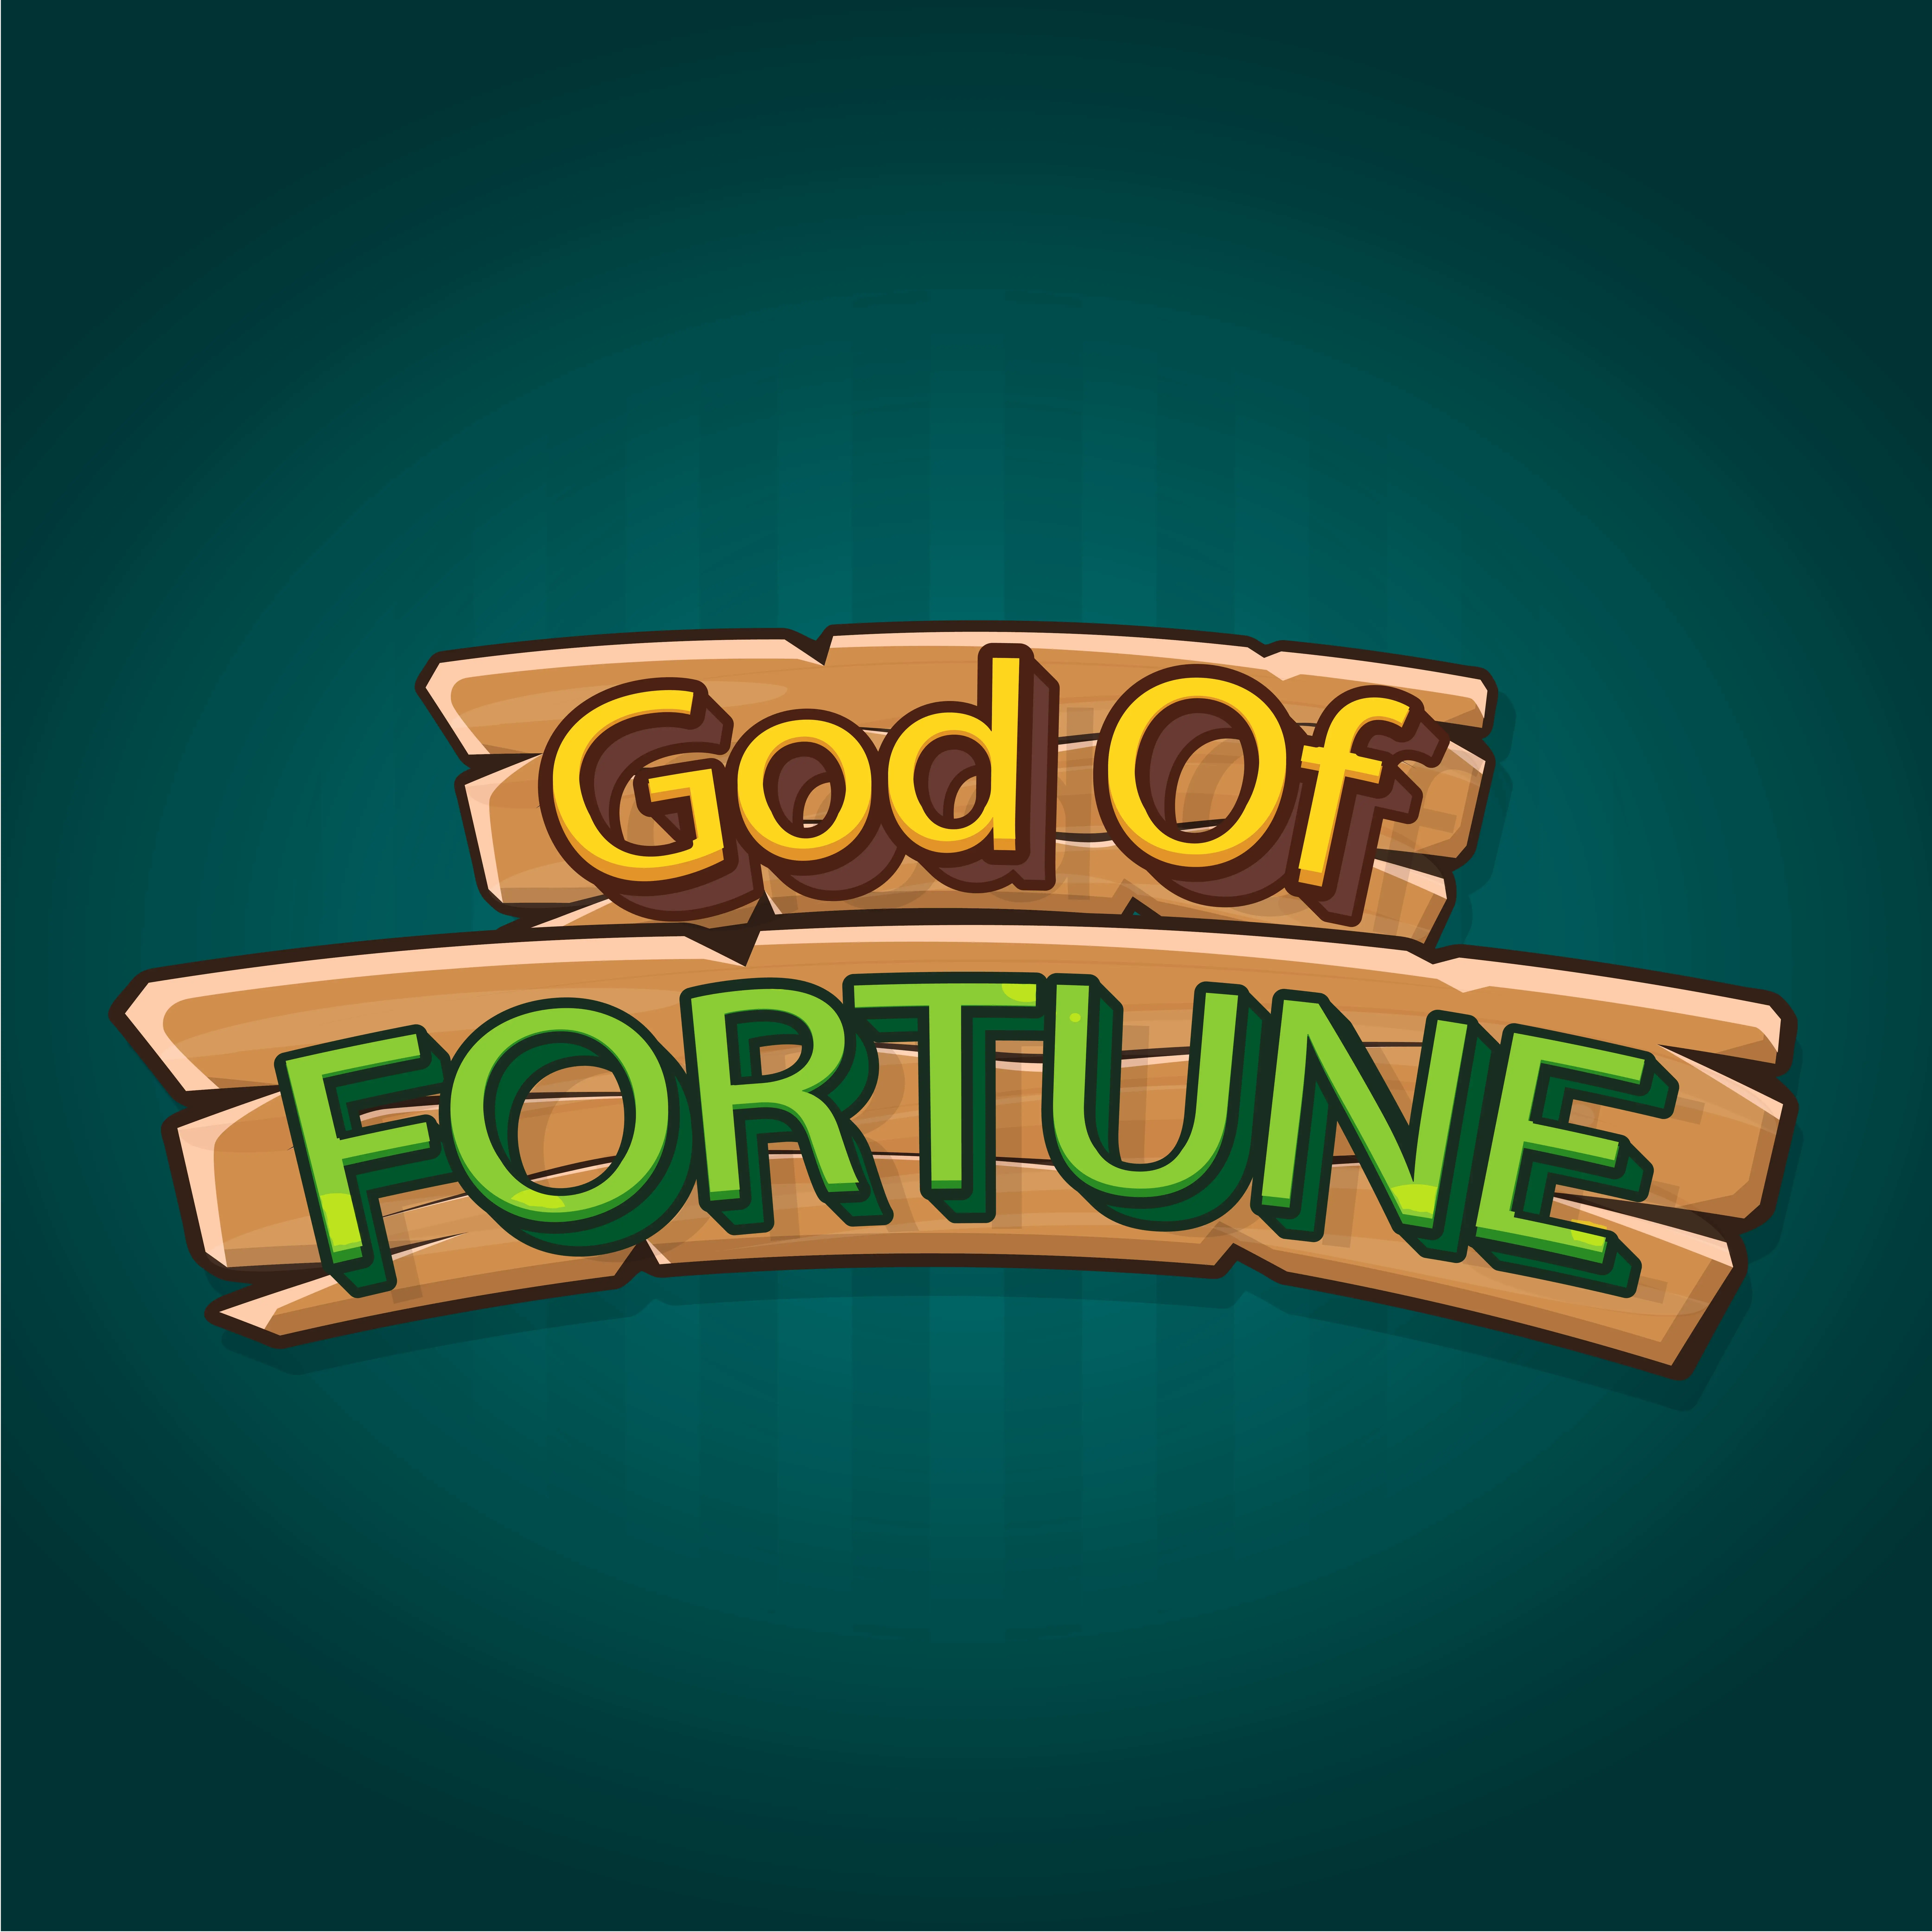 god-of-fortune